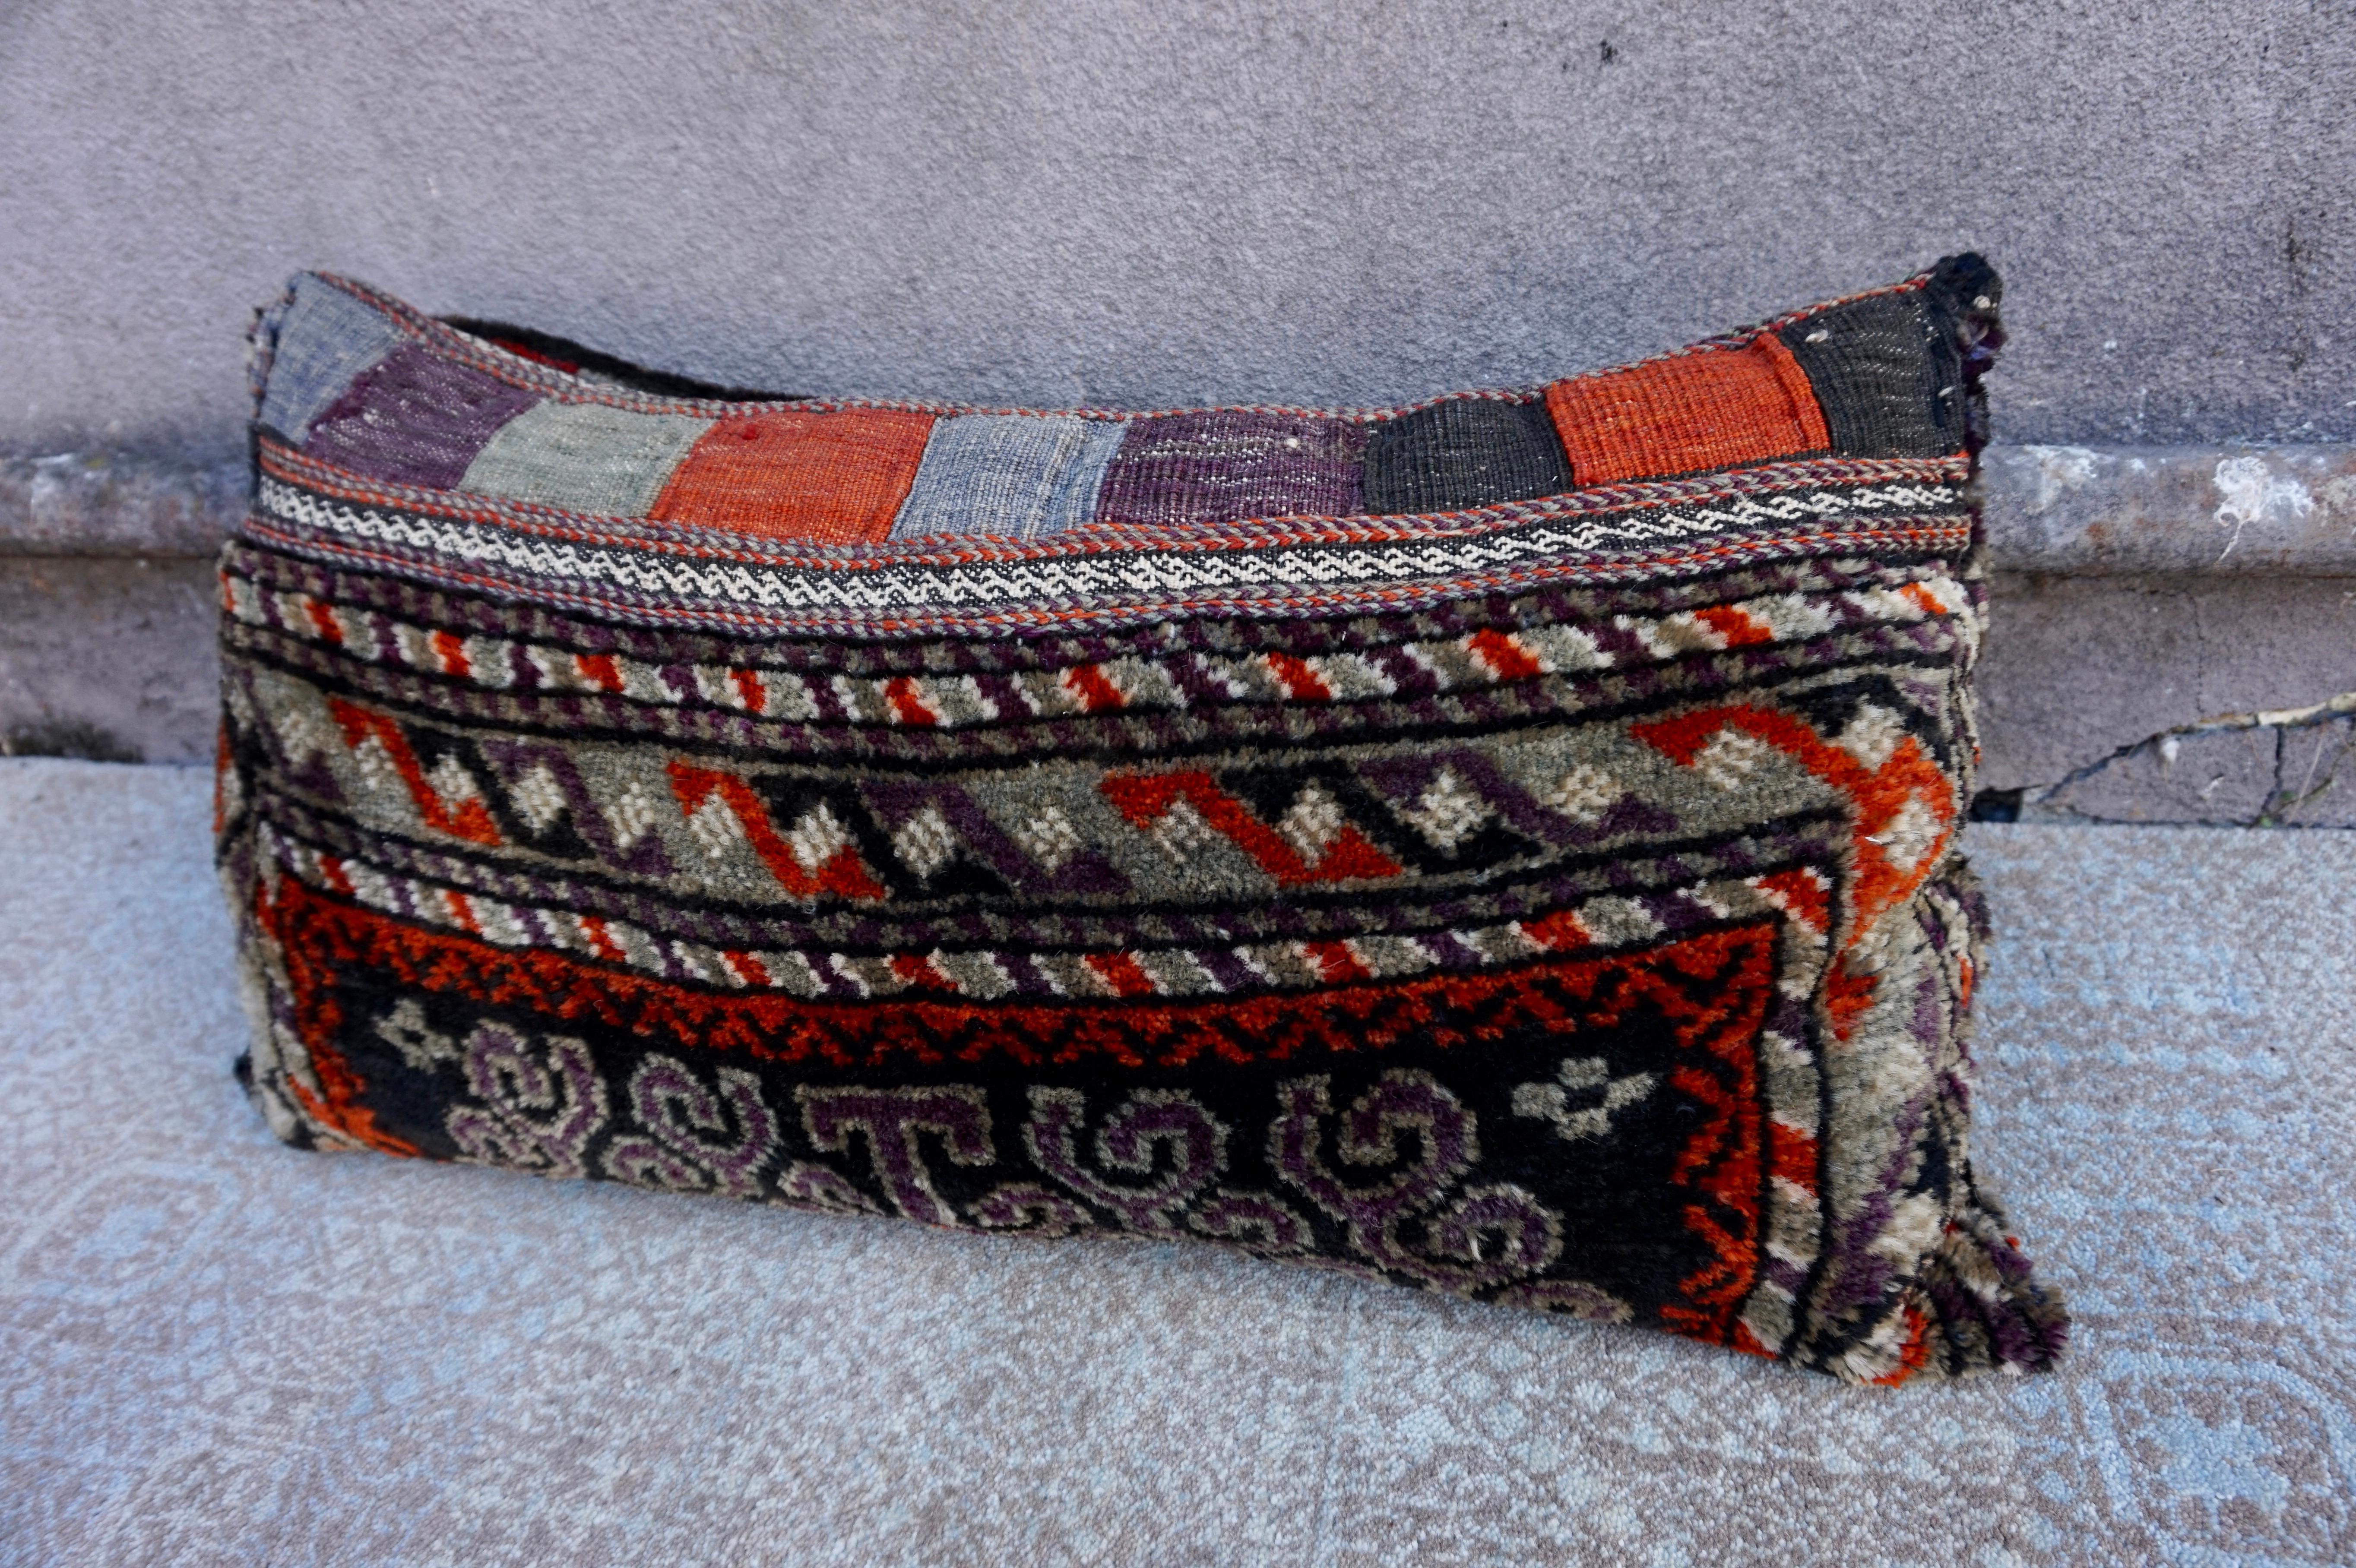 Afghan Rustic Hand-Knotted Wool Cushion Pillow with Geometric Tribal Patterns For Sale